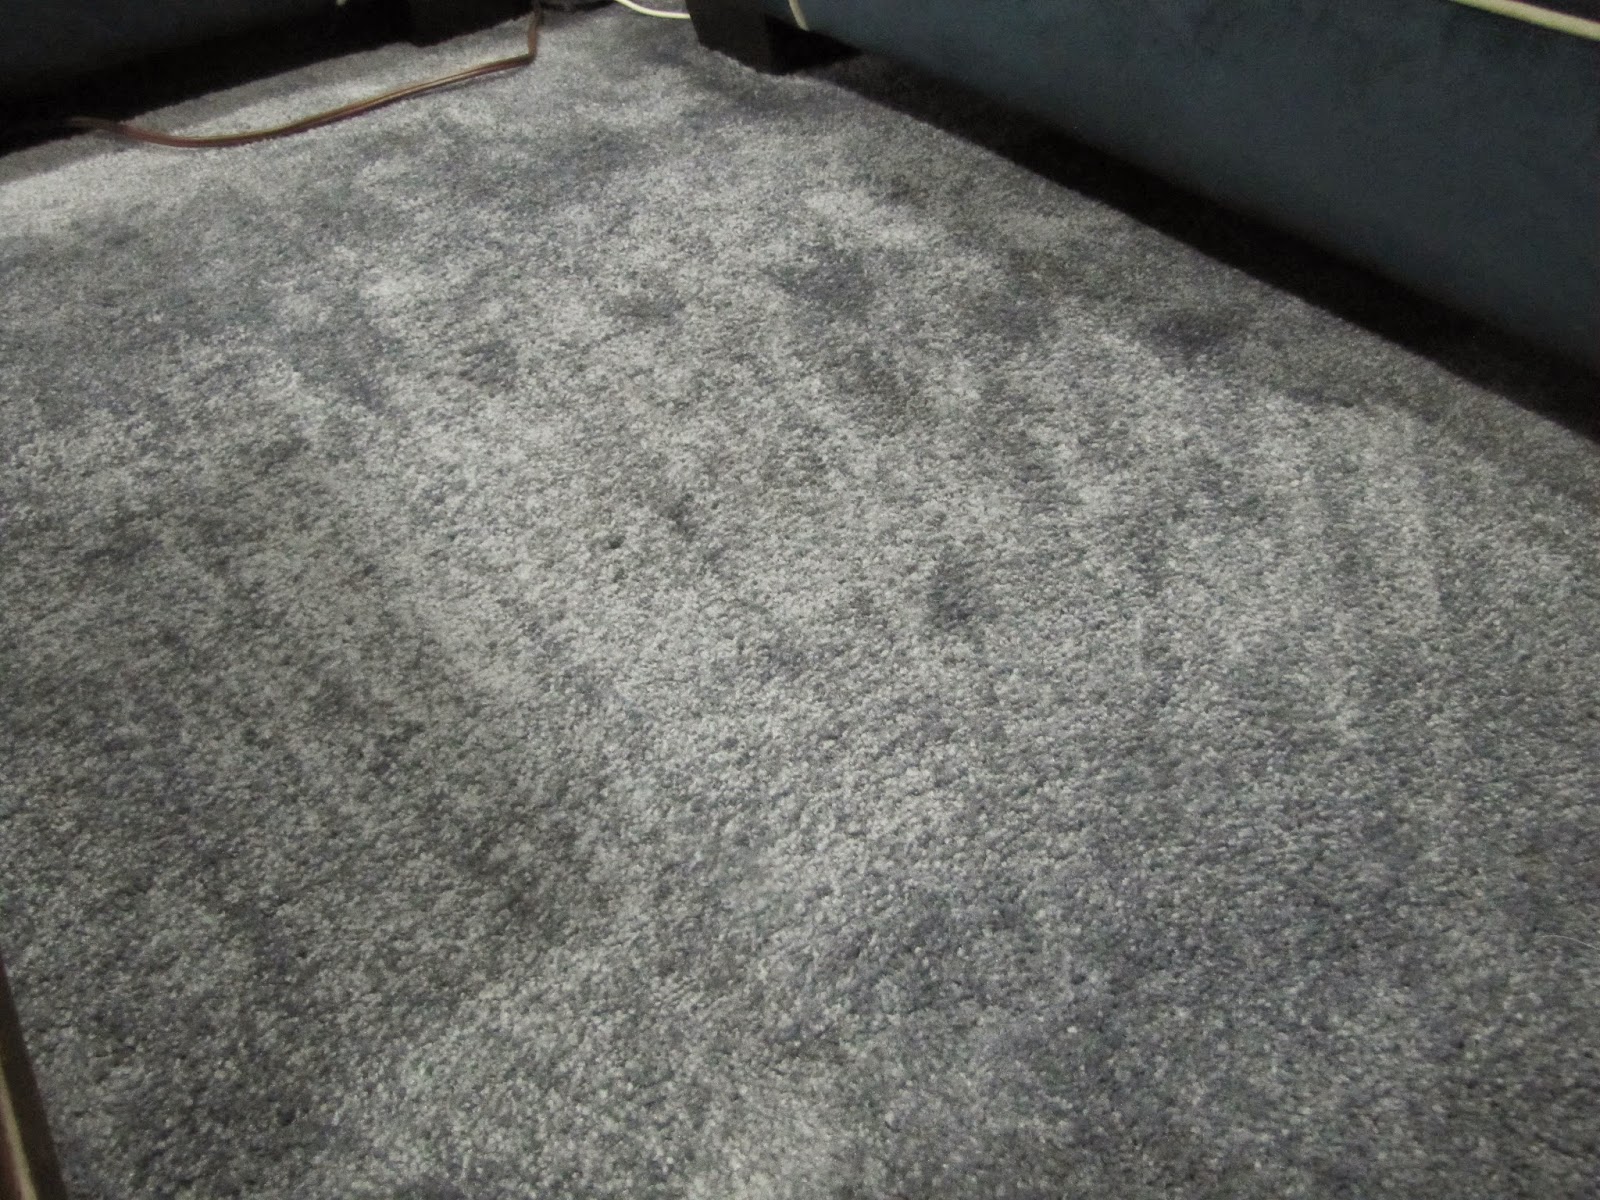 Pasta Stains In Carpet